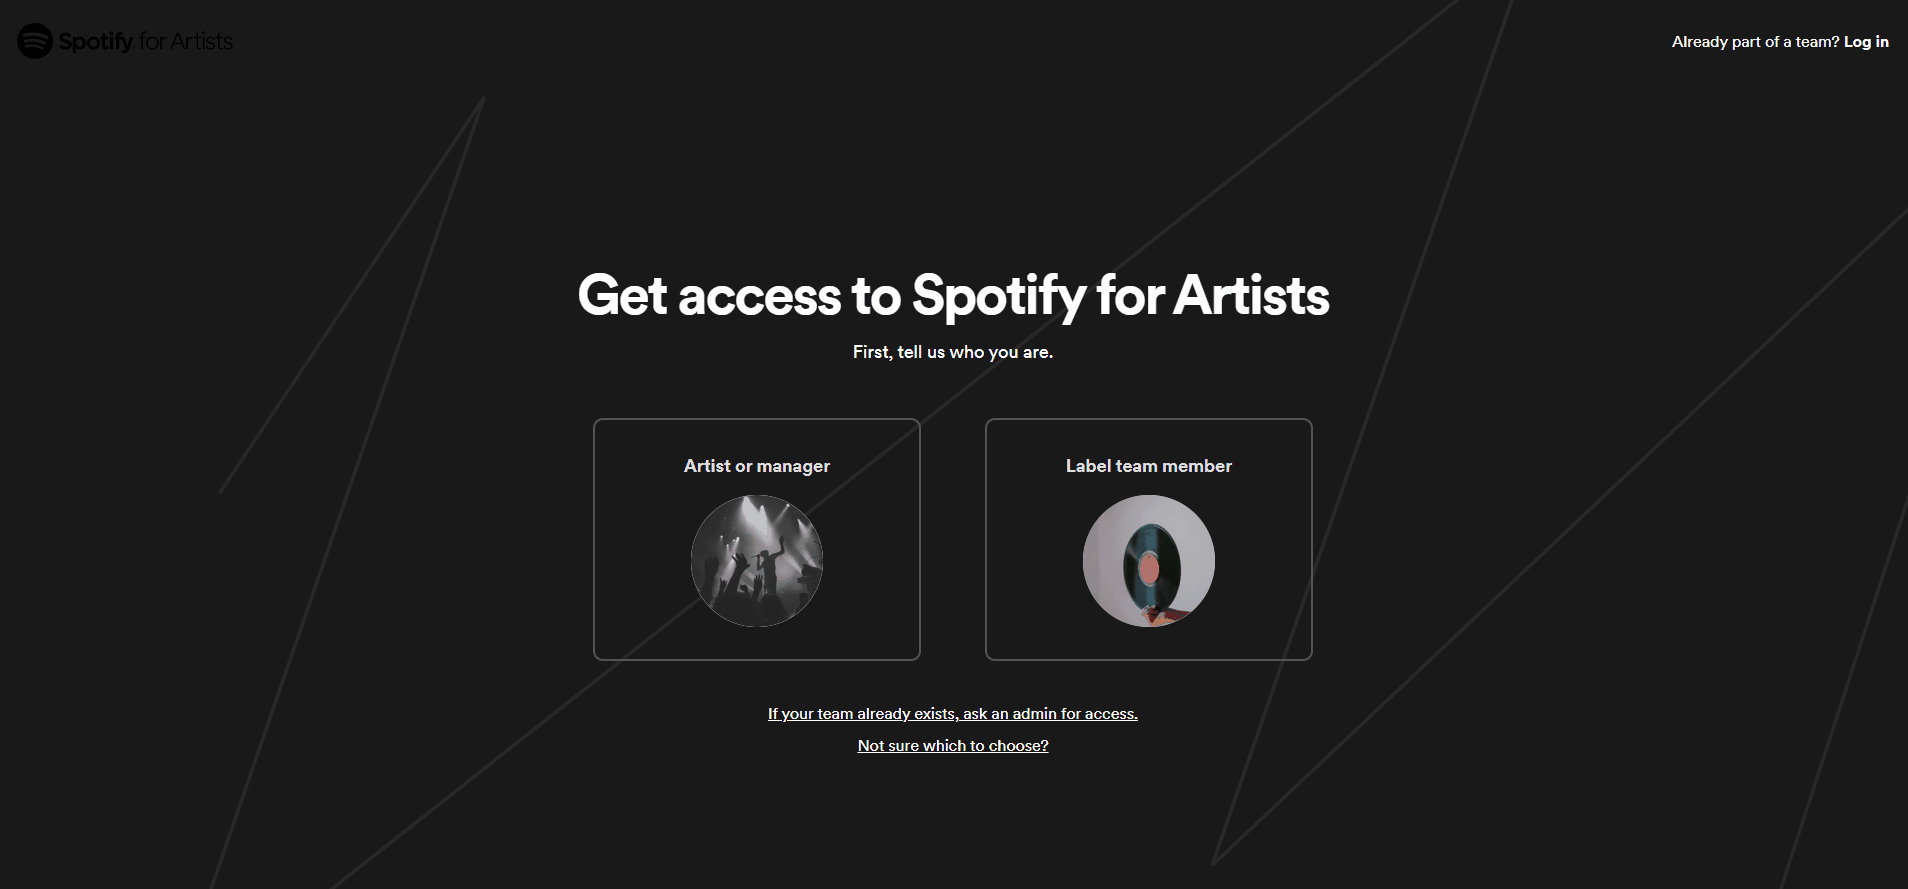 how-can-i-claim-my-artist-profile-on-spotify-through-spotify-for